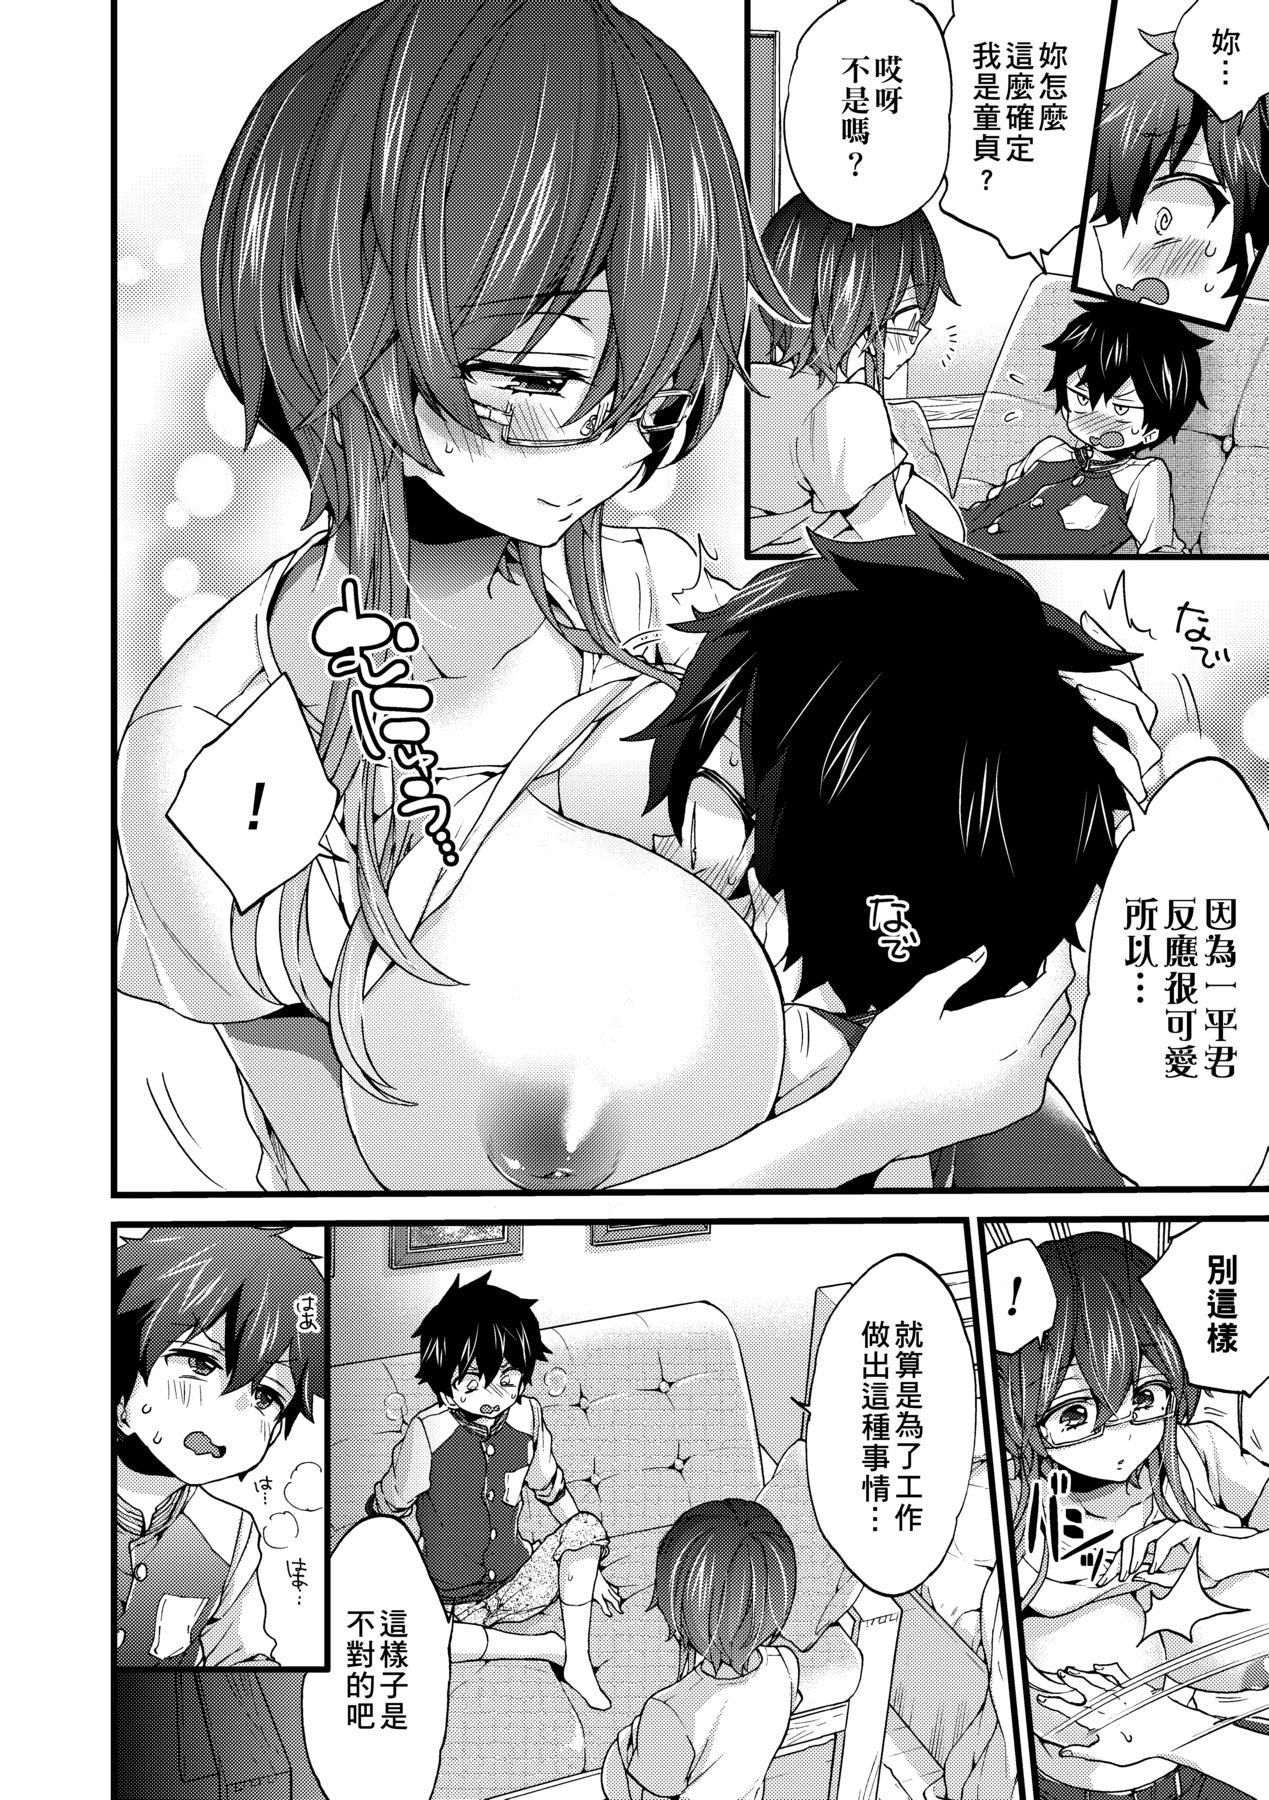 Spreading Oneshota Dish | 御姐正太豪華拼盤♡ Gayclips - Page 11